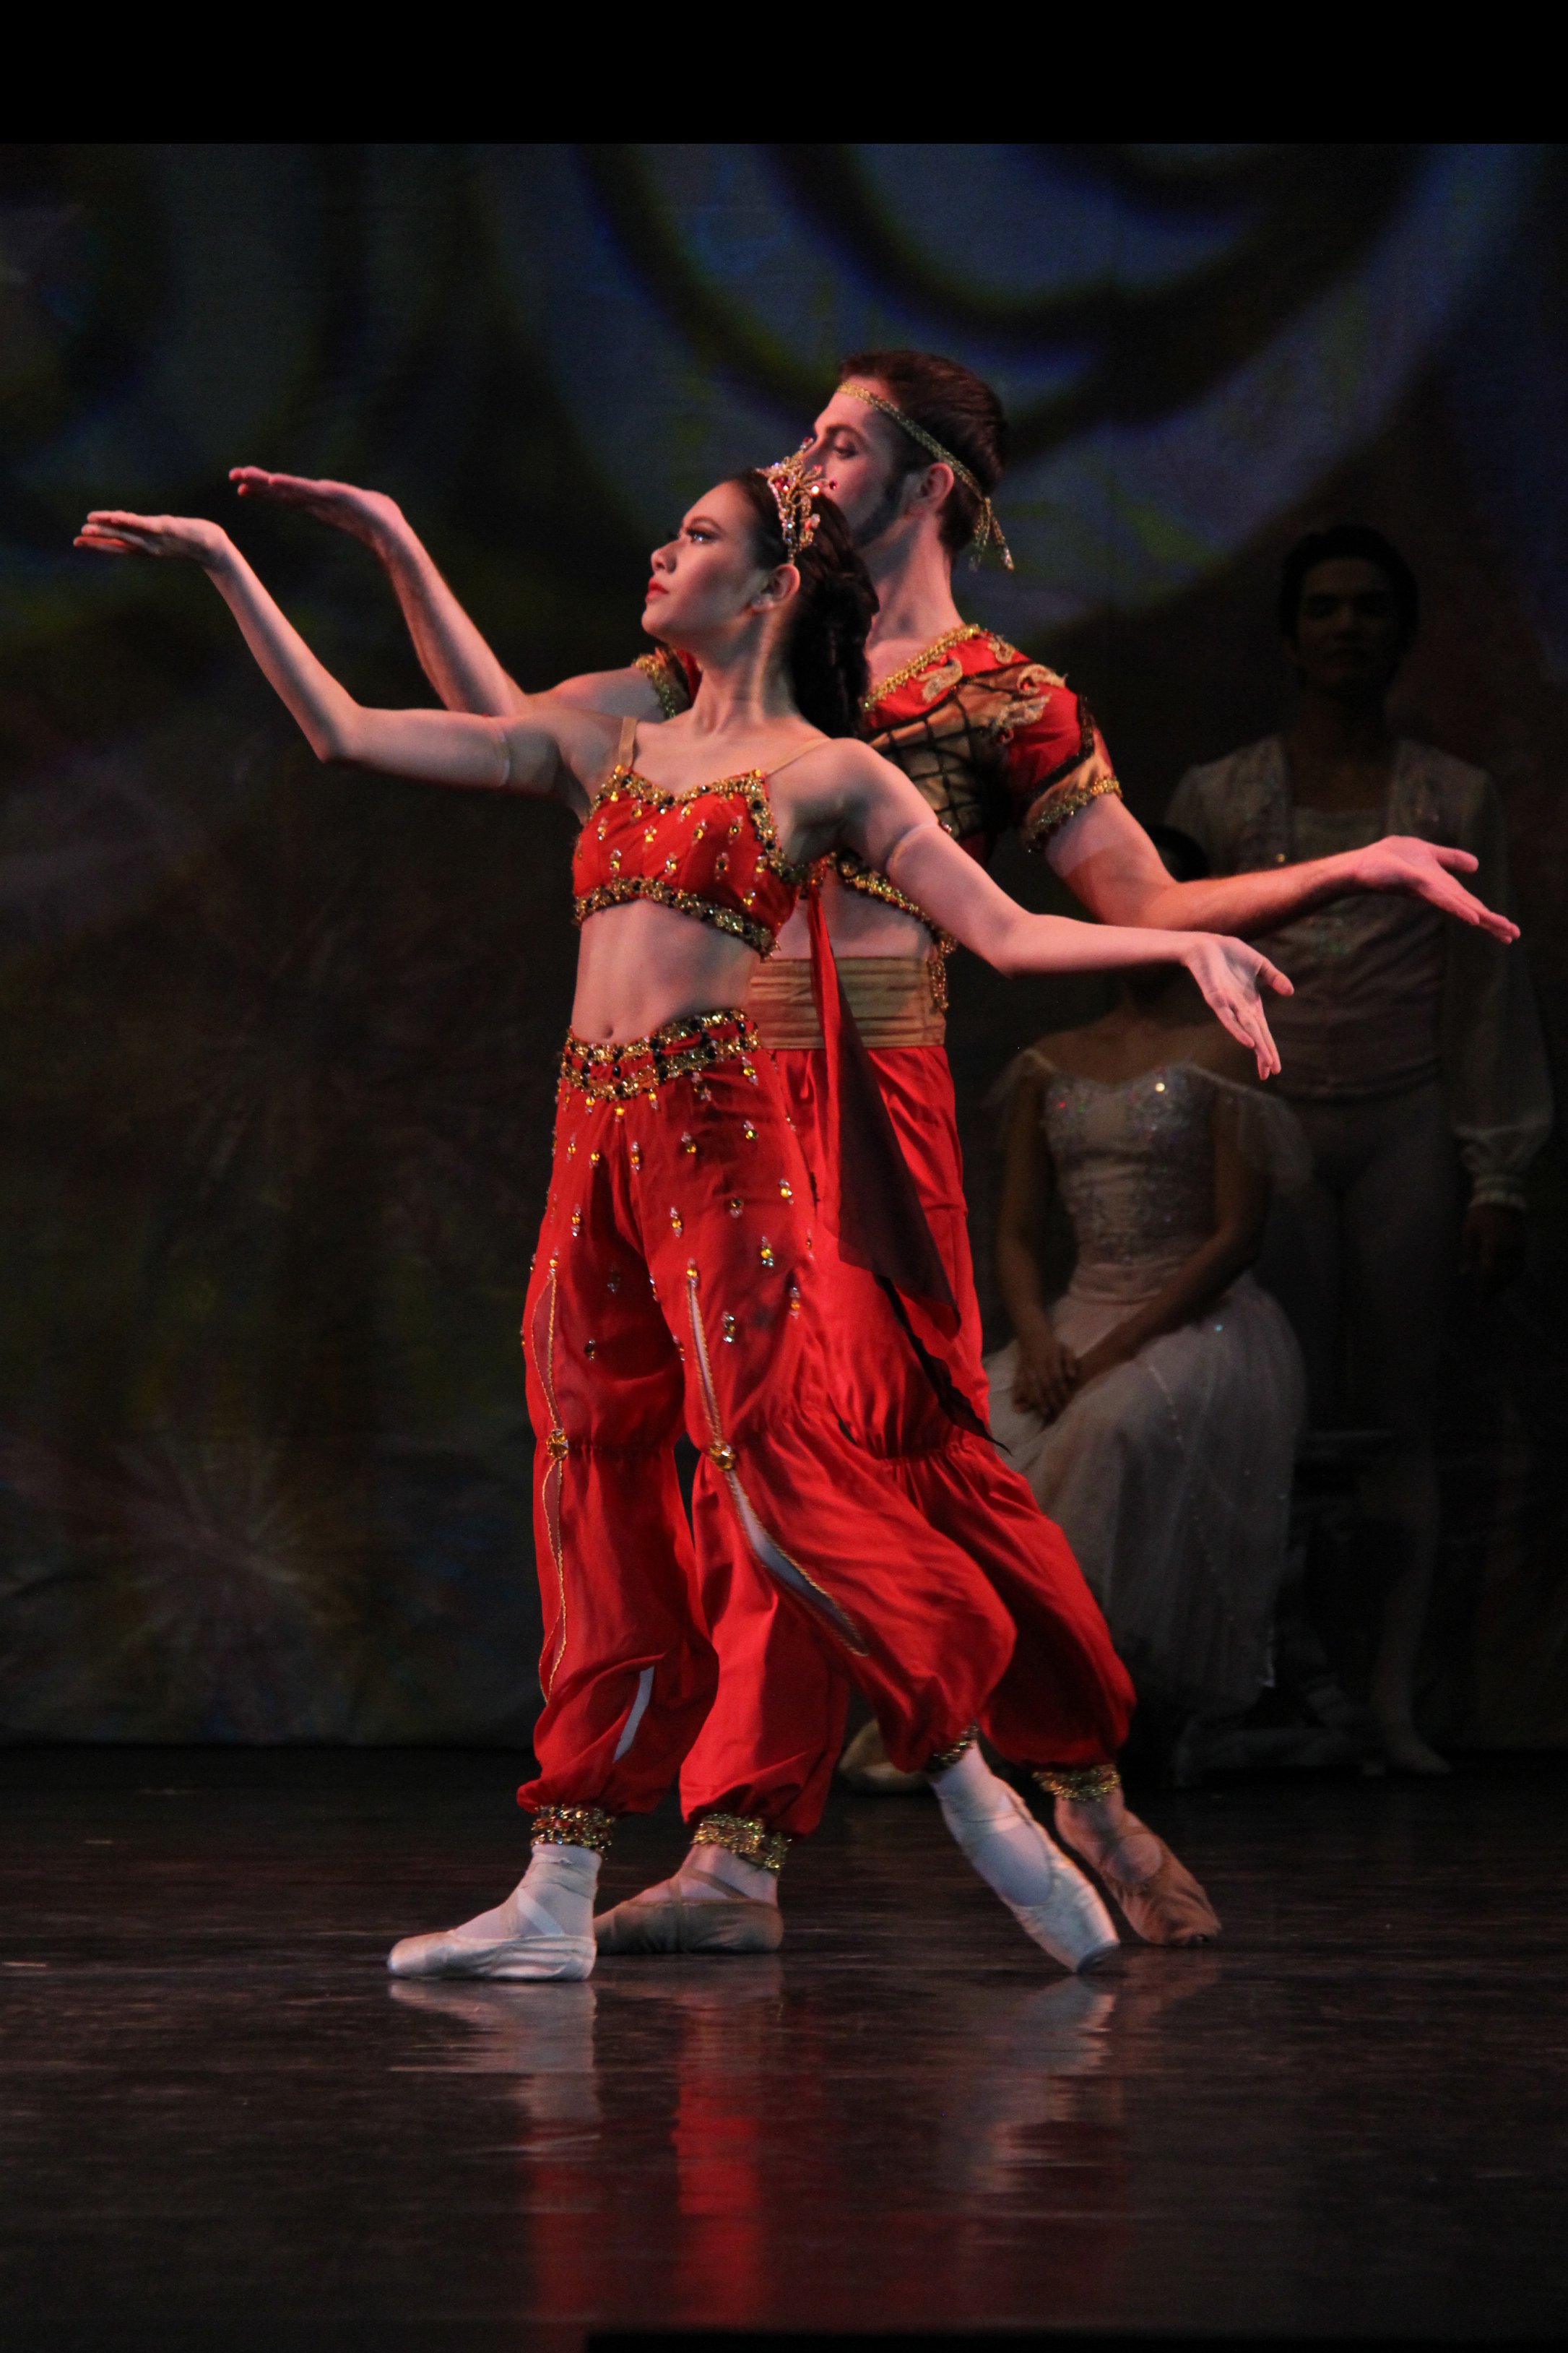    Dancing to exotic strains, Abigail Oliveiro and Brian Williamson are featured in the Arabian Dance. They represent coffee which has been cultivated in the Middle East for centuries, and in their movements, channel its unmistakably robust aroma.   